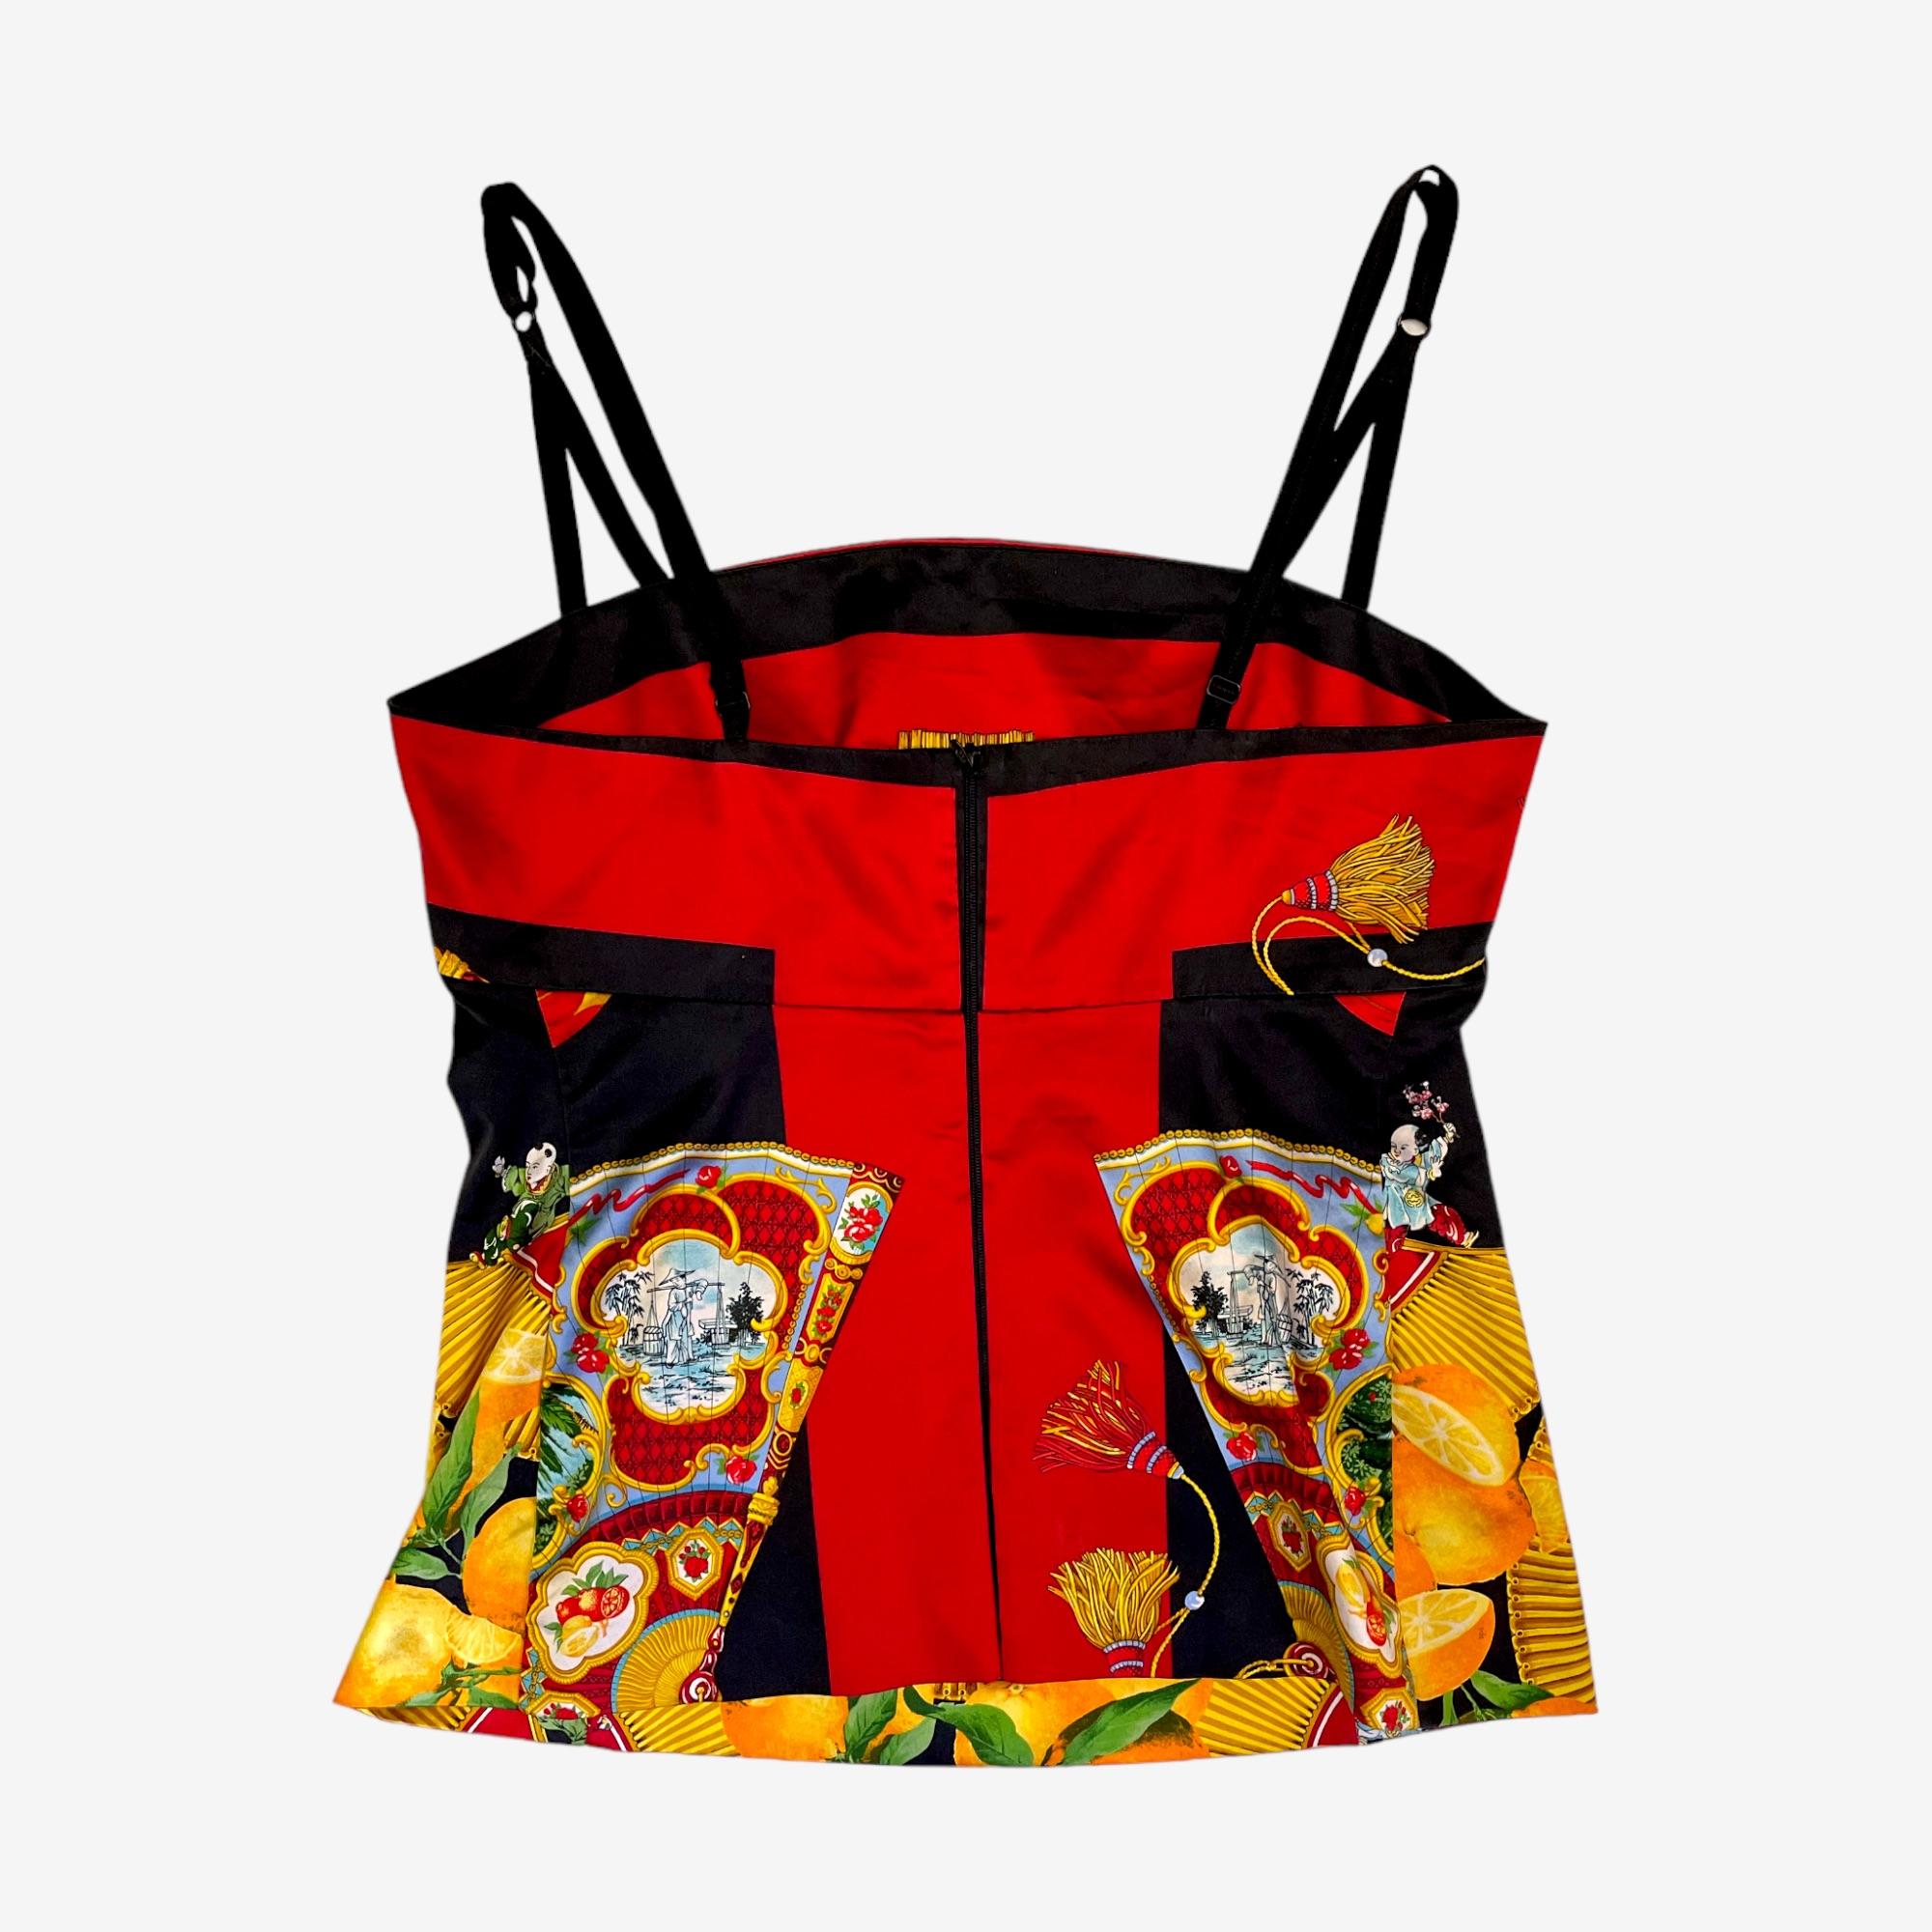 Rare Dolce e Gabbana Top
Chinese and Sicilian prints
F/W 1998
Size: M
Measures: Chest 44cm / Length  60cm
Materials: 56% Silk 38% Nylon 6% Elastan
Conditions: Very Good.